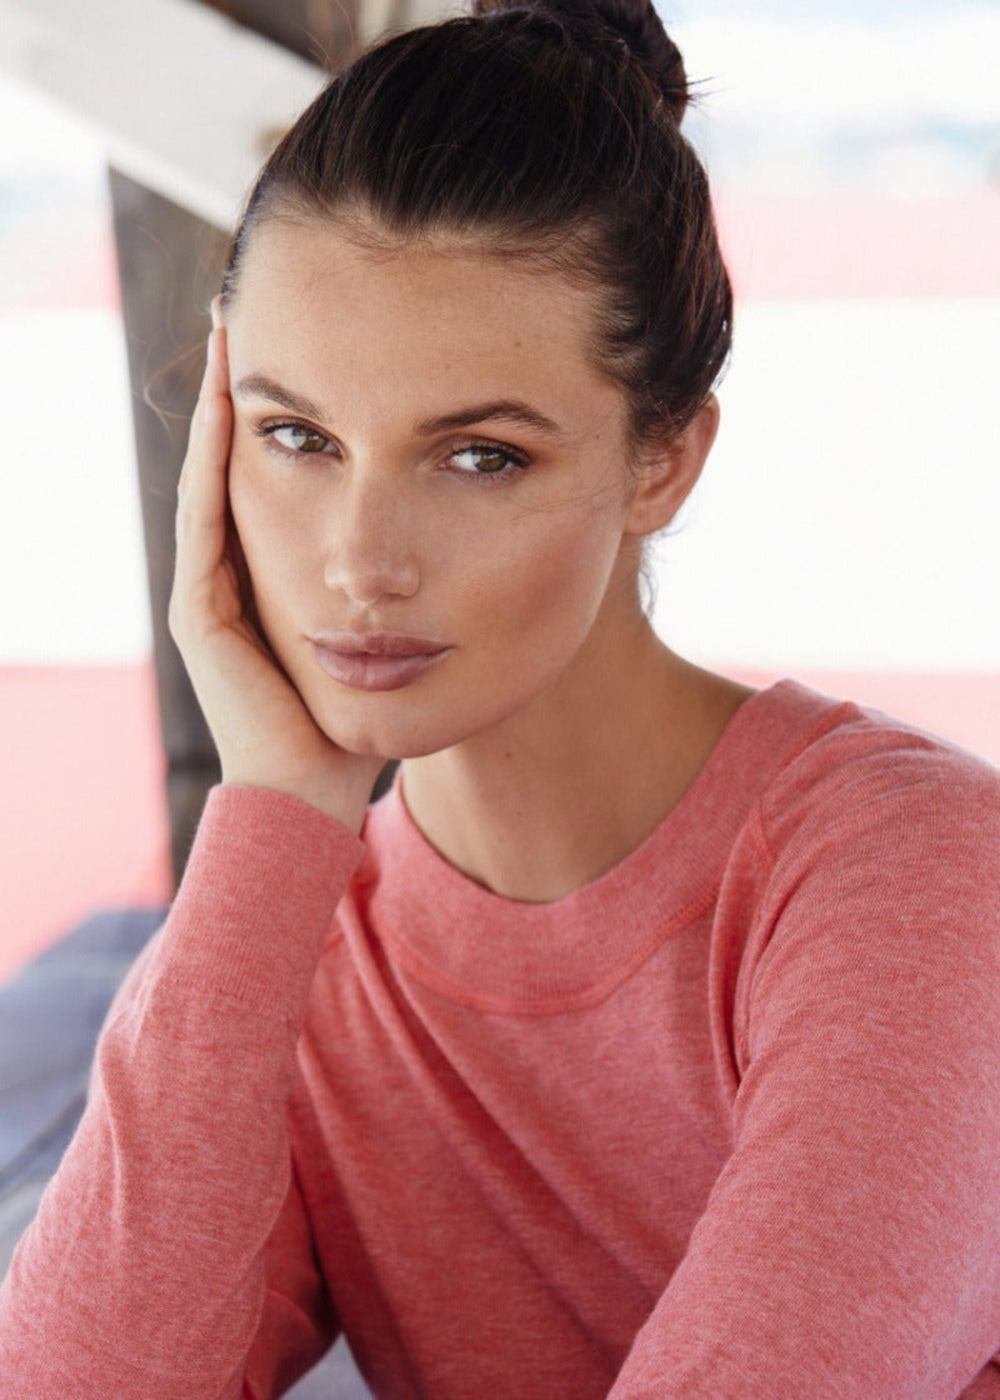 This image is a close-up view of a woman wearing the pastel red organic cotton Restore Sweater. Understated and chic, this year-round light weight crewneck has a vintage -inspired feel and is crafted of delicately soft organic cotton and Repreve for a luxurious buttery soft finespun jersey.